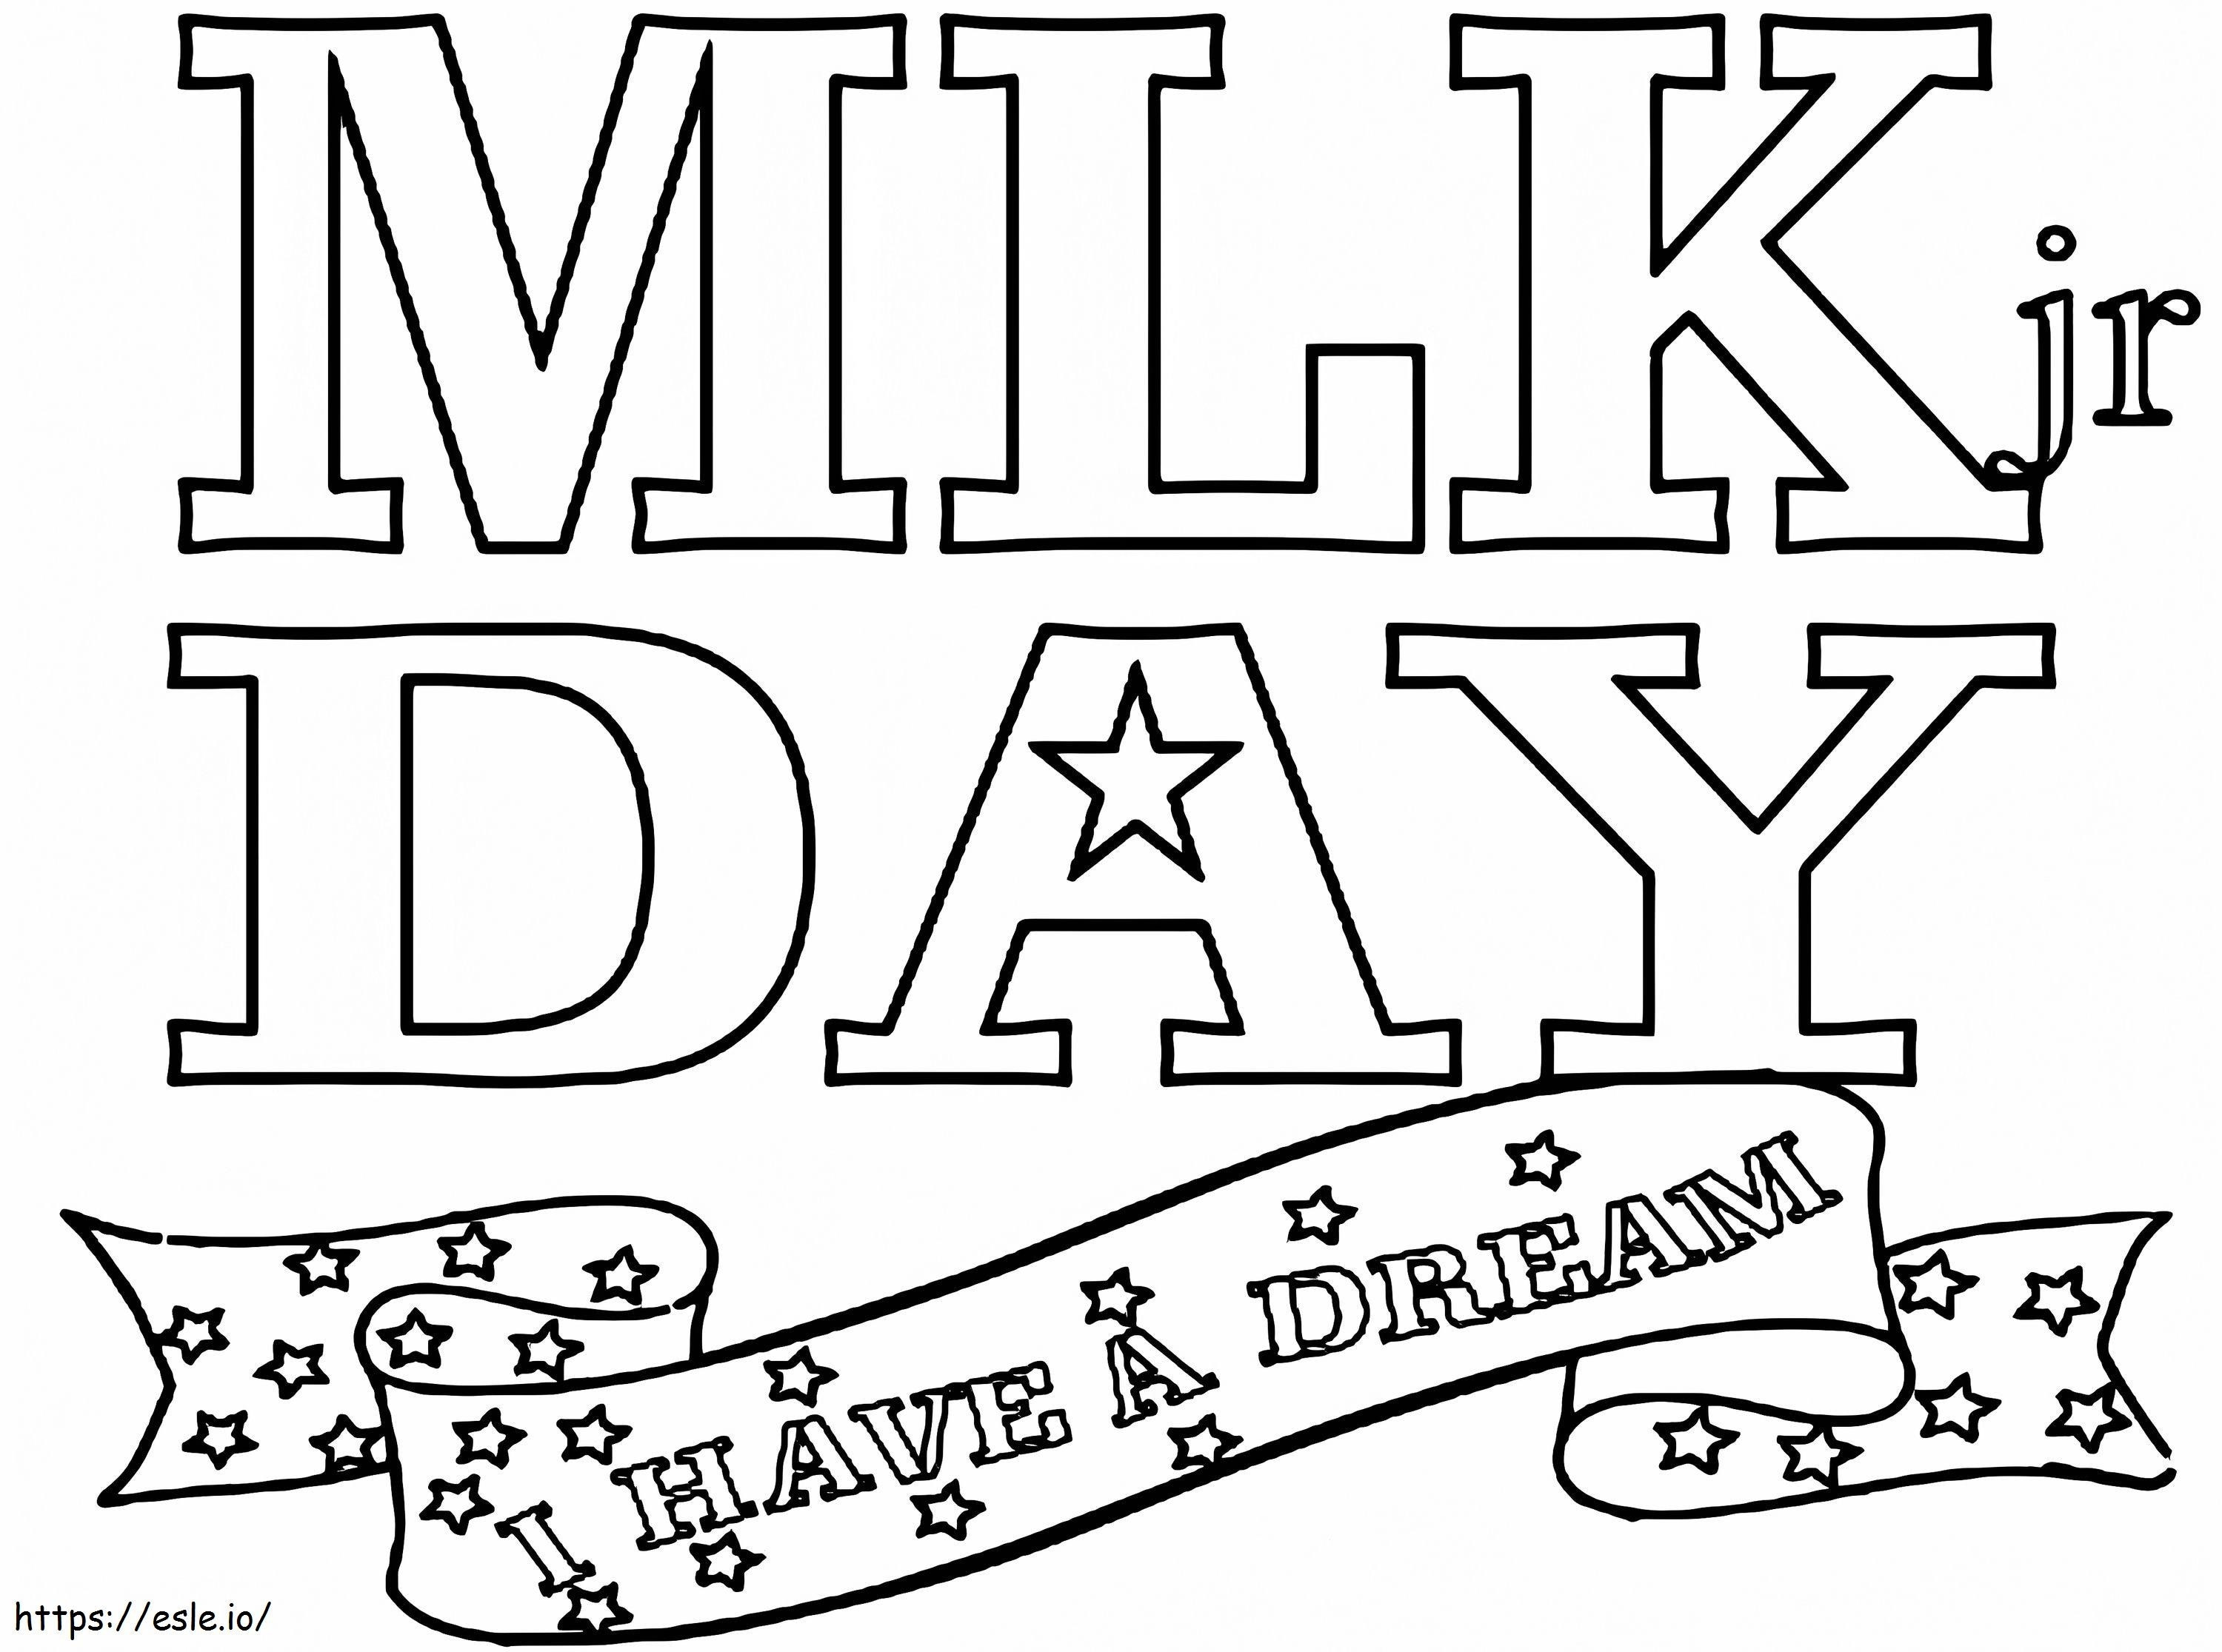 Martin Luther King Jr. Day 6 coloring page